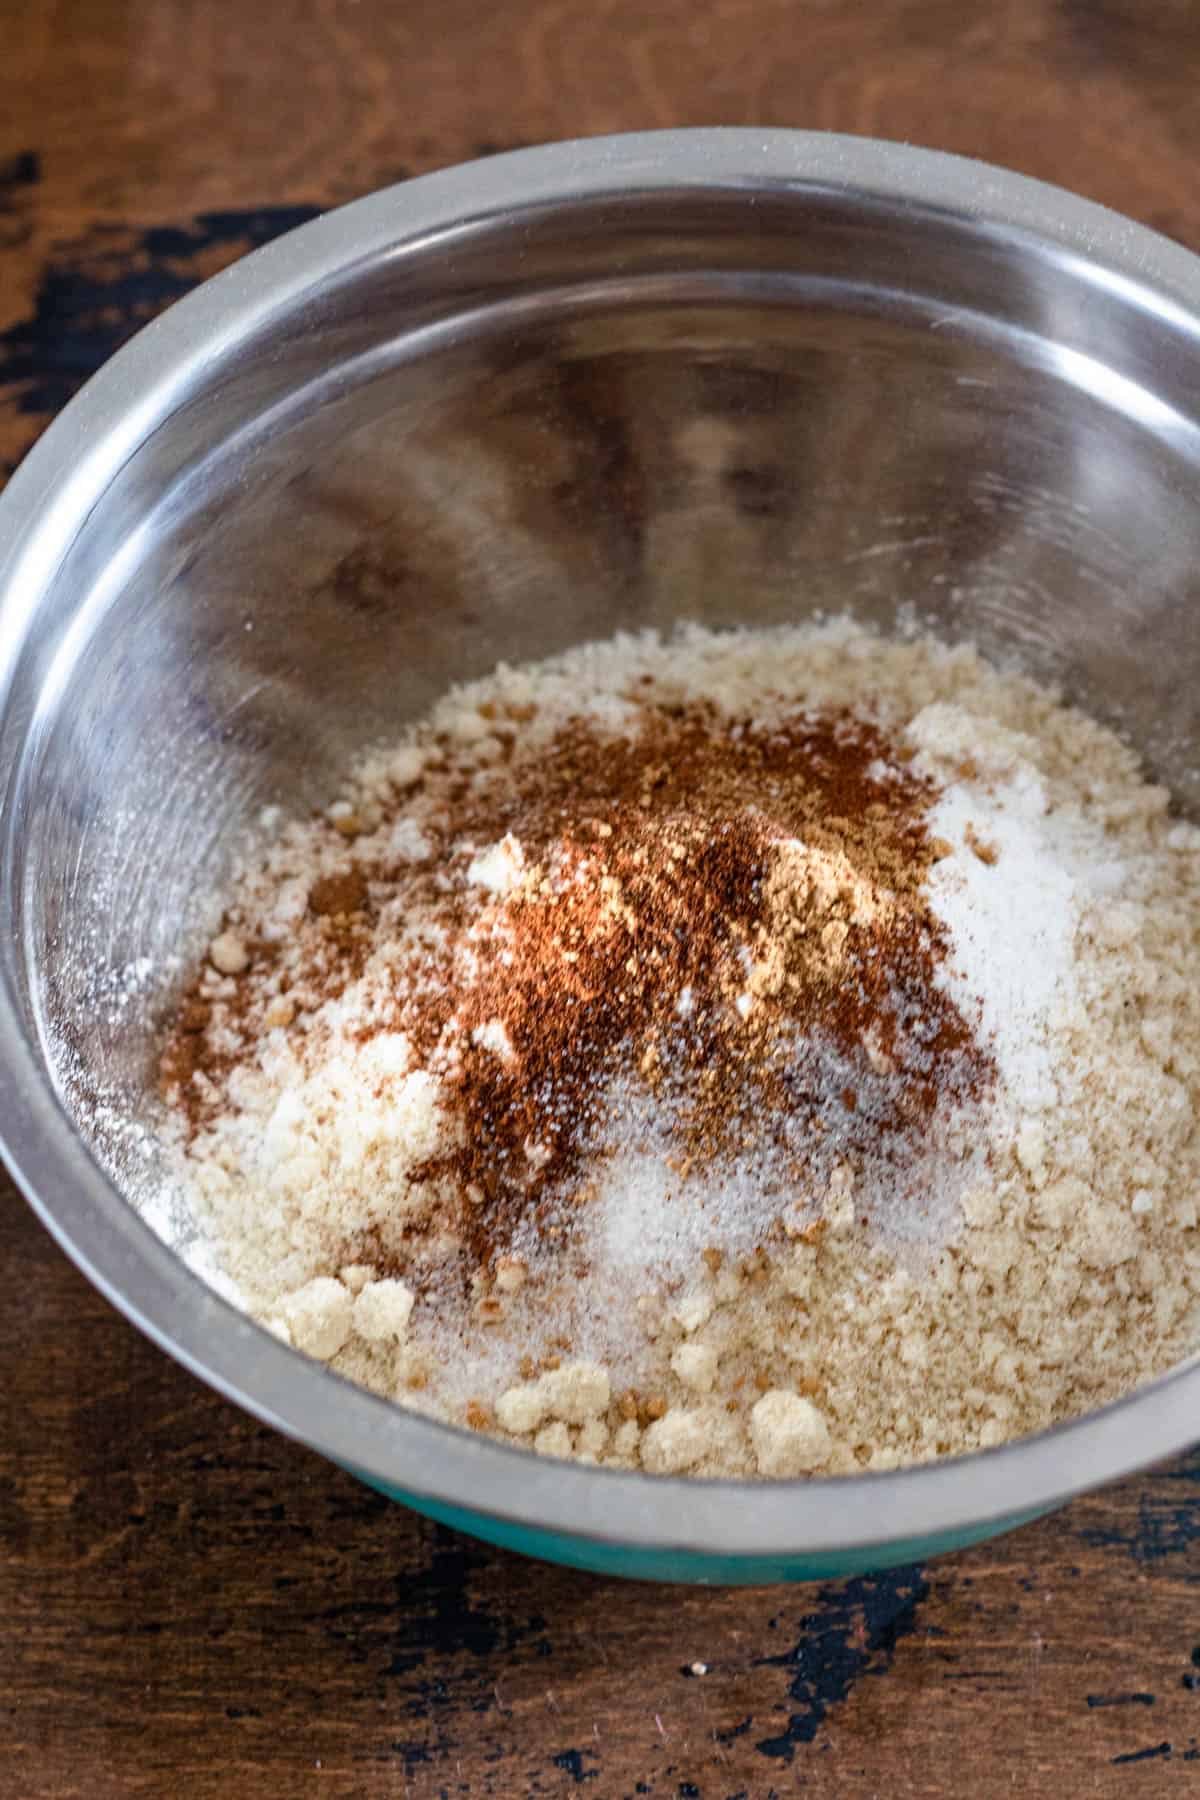 metal bowl with dry ingredients; gluten free flour, almond flour, baking powder, baking soda, cinnamon, ginger, nutmeg, cloves, and salt with a dark wood colored background